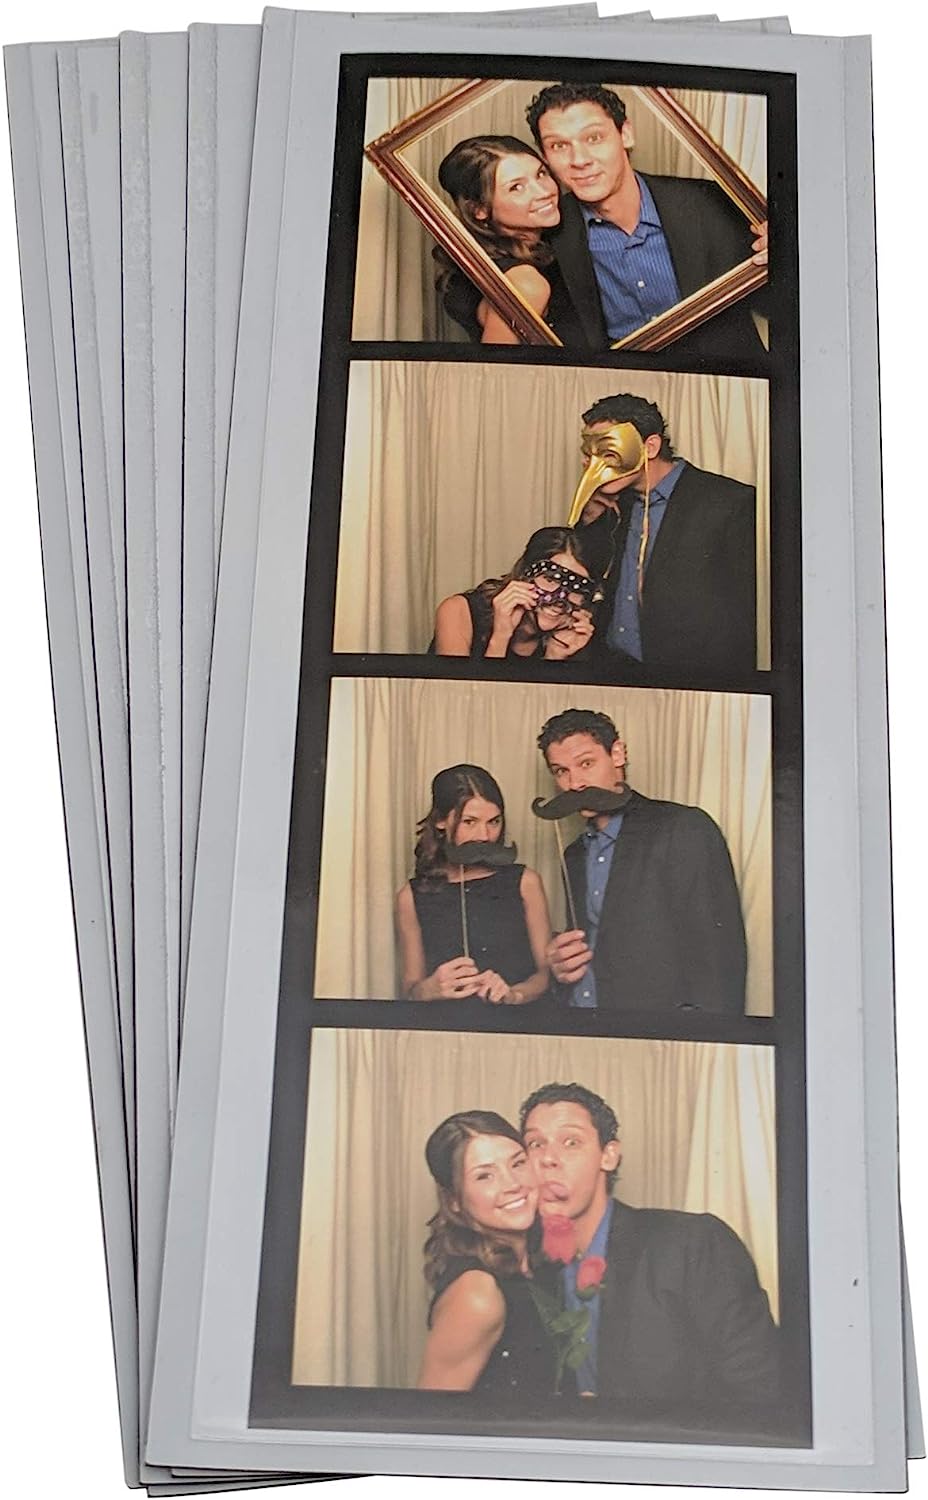 Fat Panda Events: Classic Photo Booth - Capture Your Memories